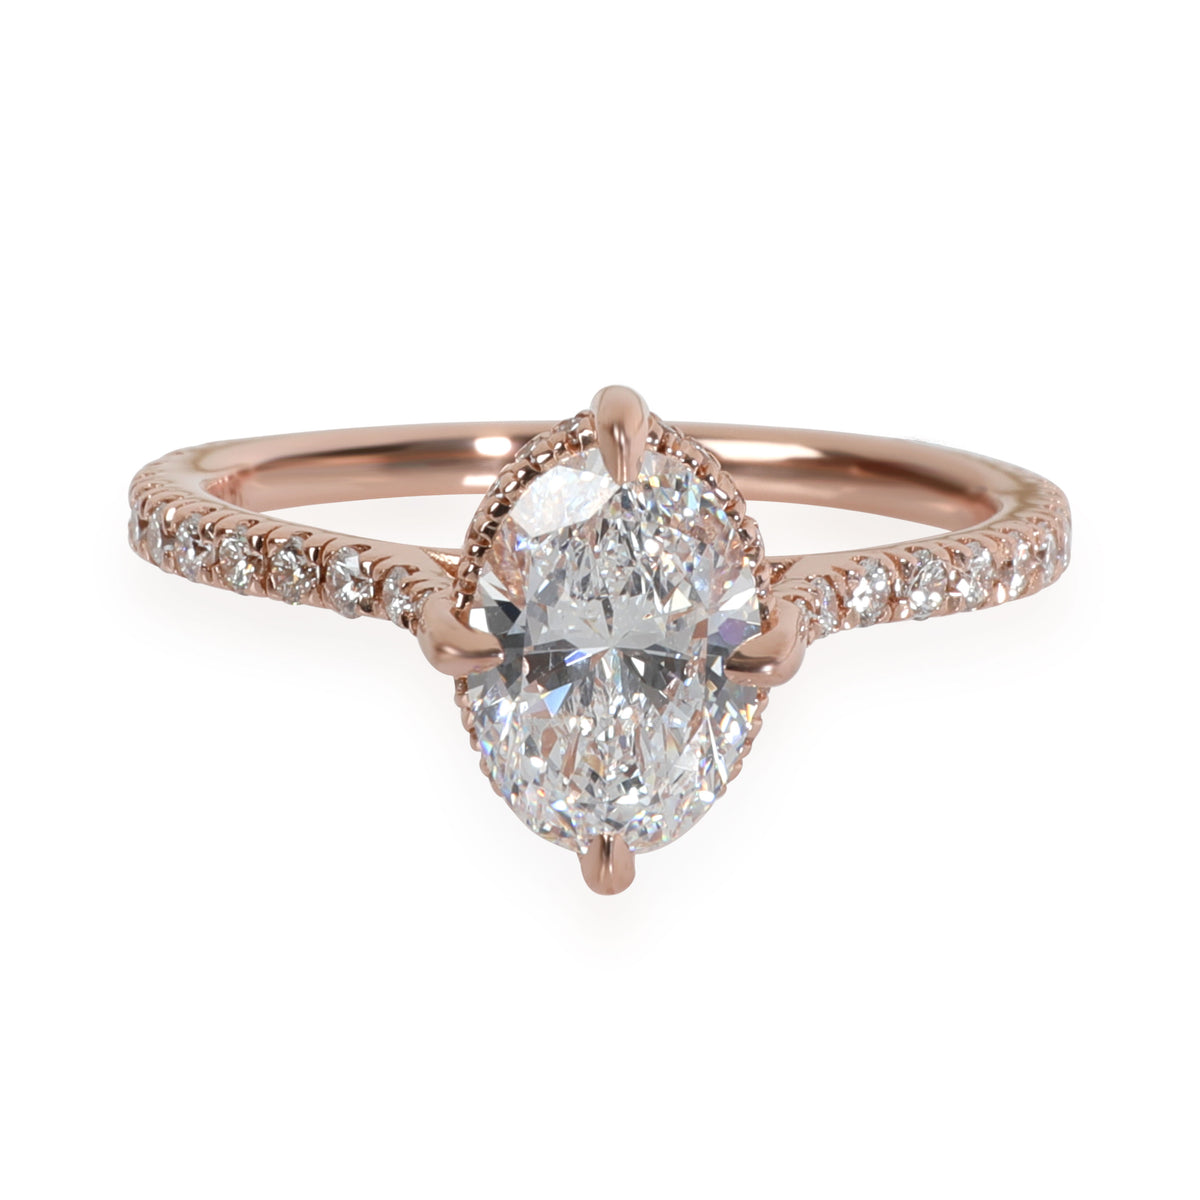 James Allen legit? Here's what I'm looking at - thoughts? Budget of $30k :  r/Diamonds